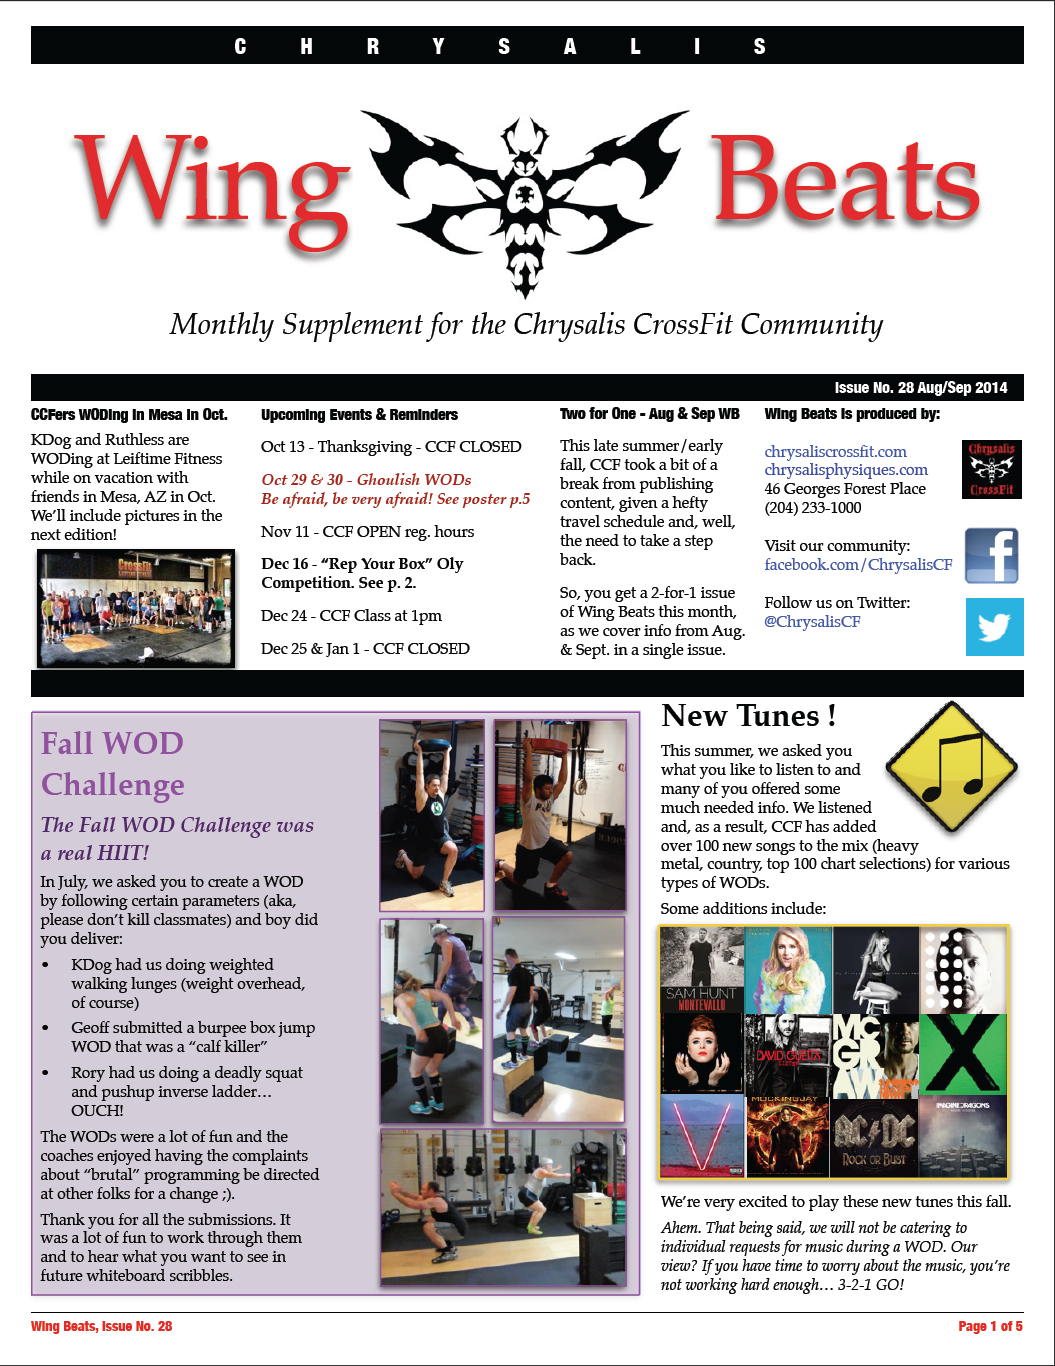 WingBeats Issue #28 - AugSept 2014